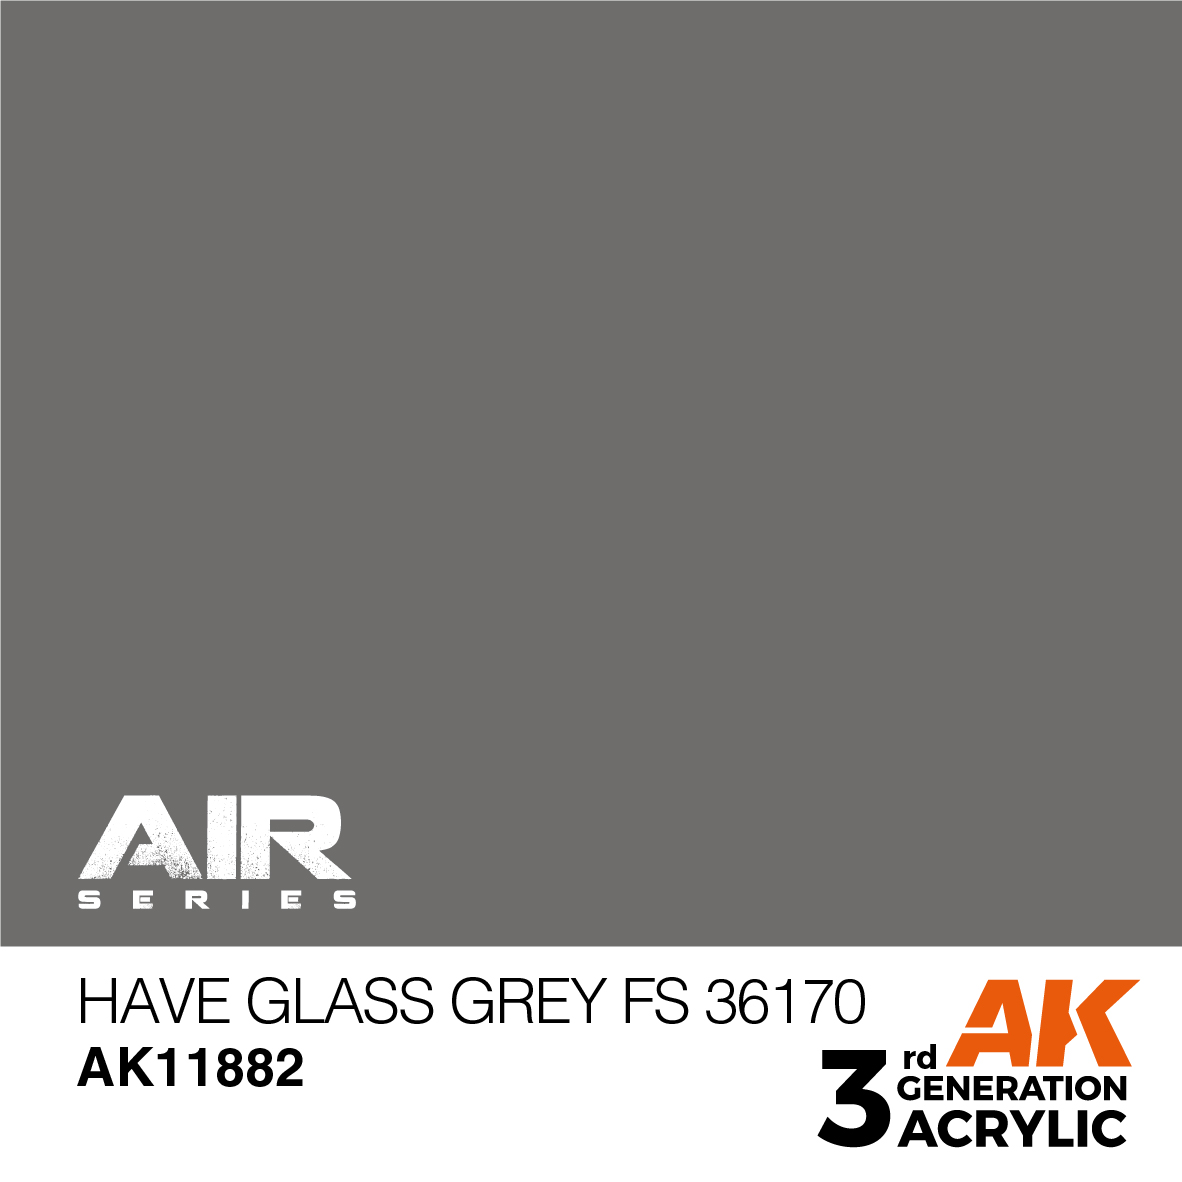 Have Glass Grey FS 36170 – AIR